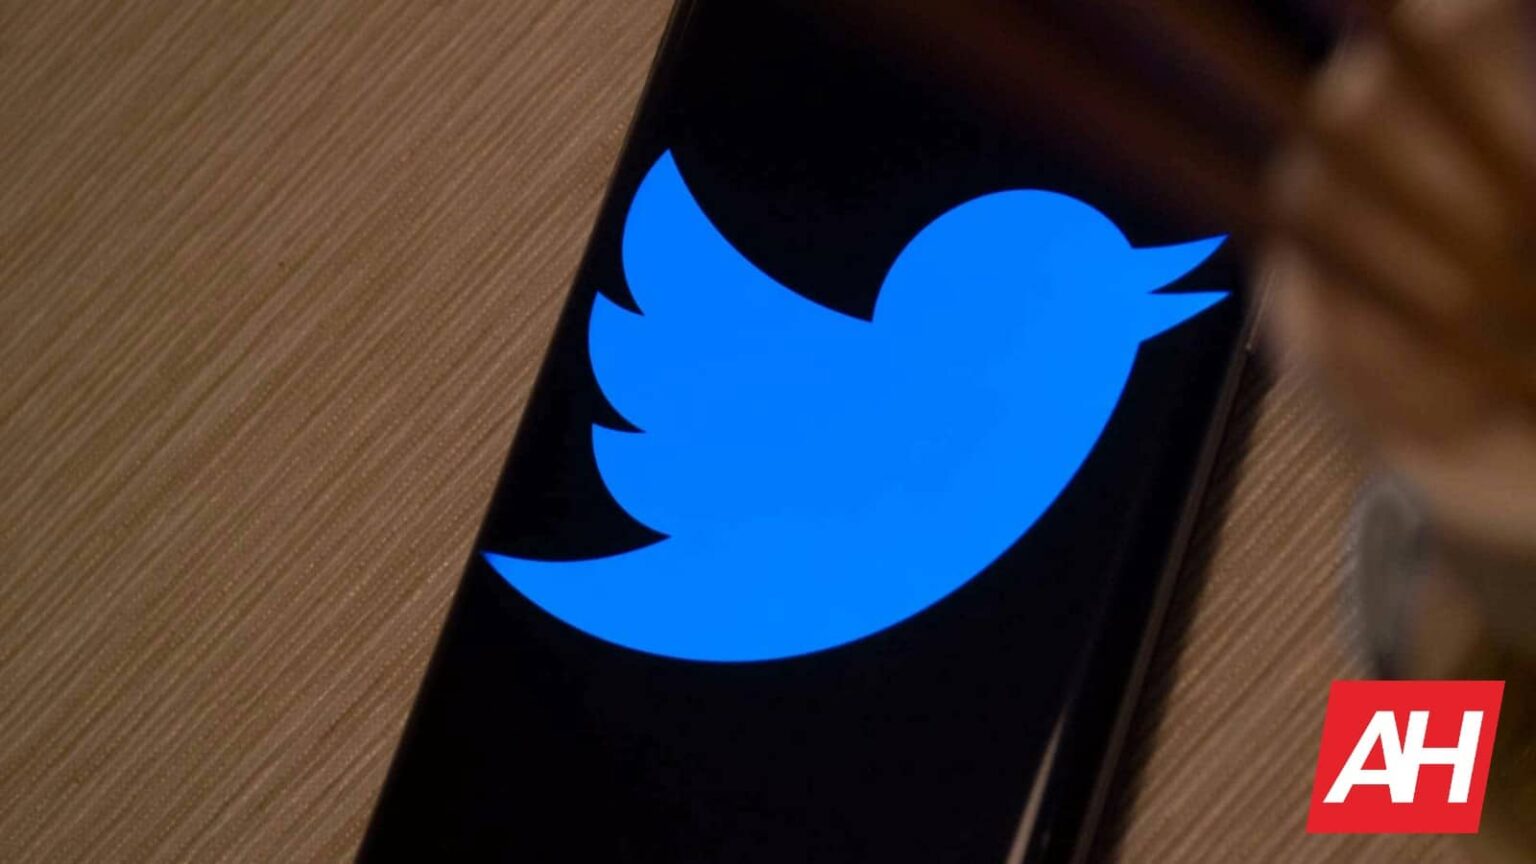 Twitter is no longer a high-risk platform for its largest ad buyer